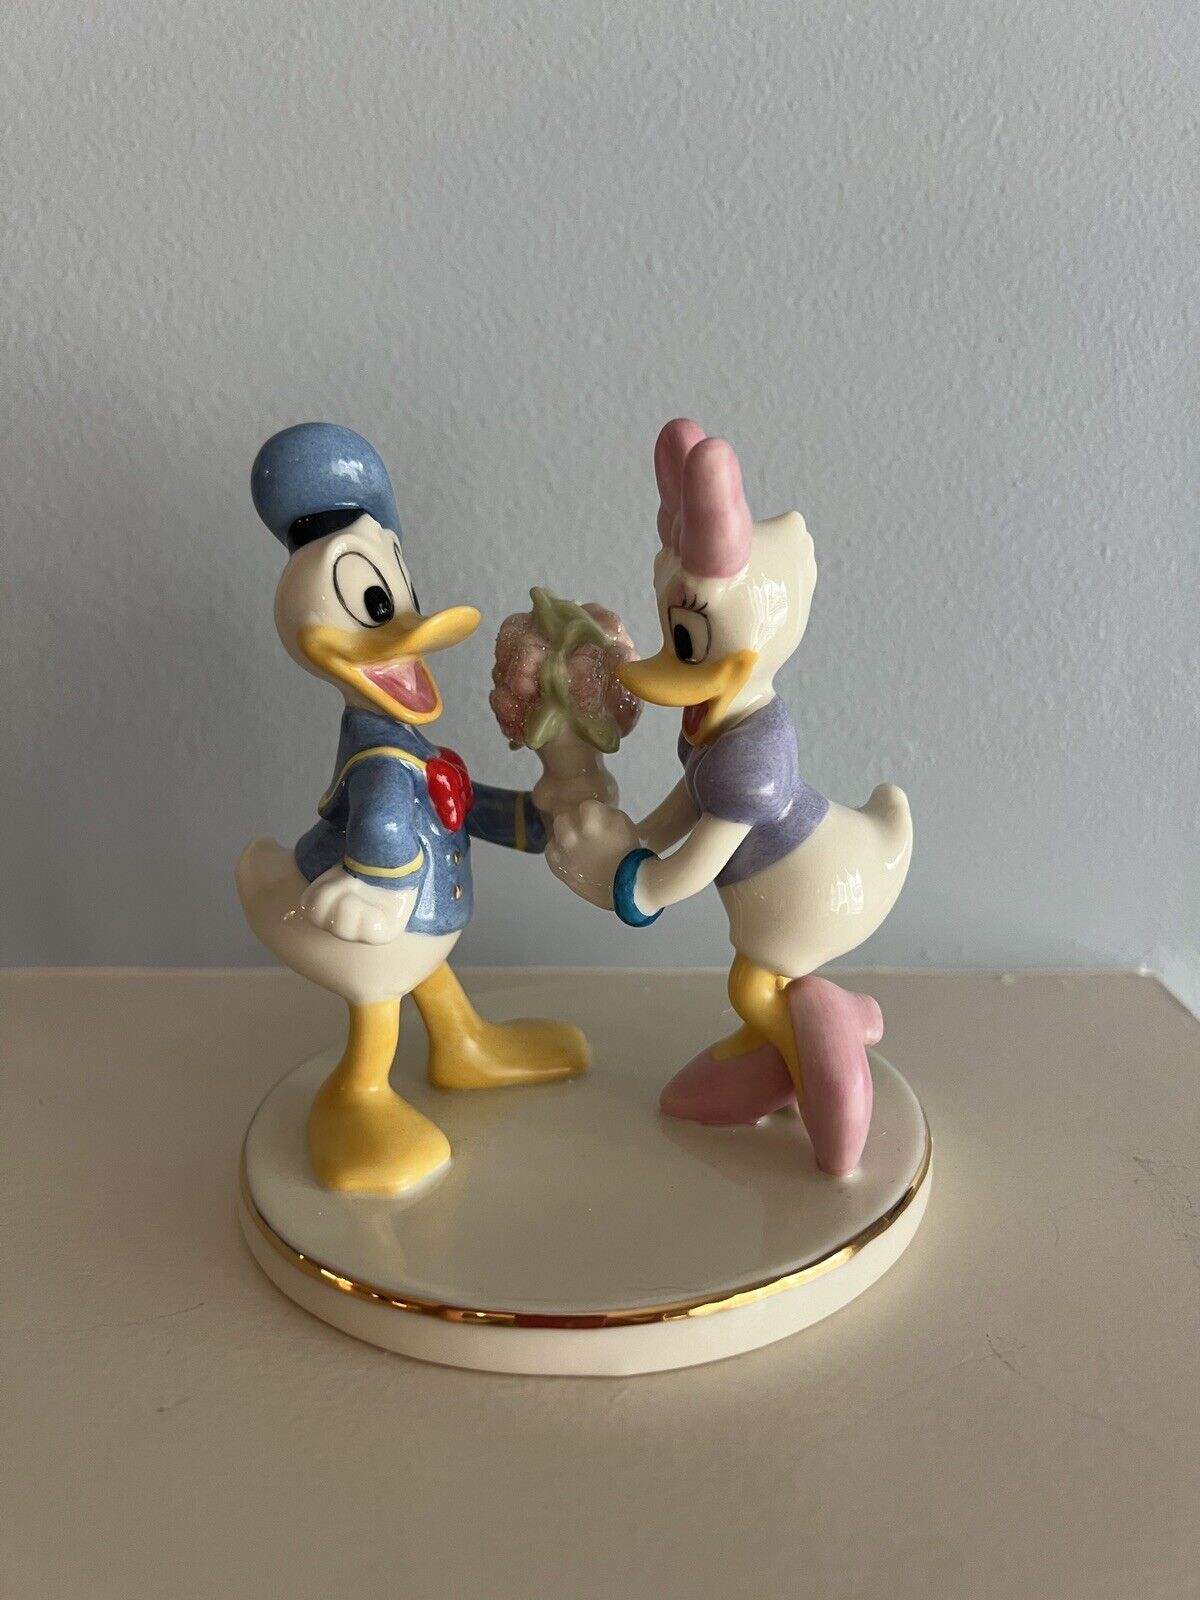 Lenox - American By Design - Donald and Daisy Together Forever Figurine